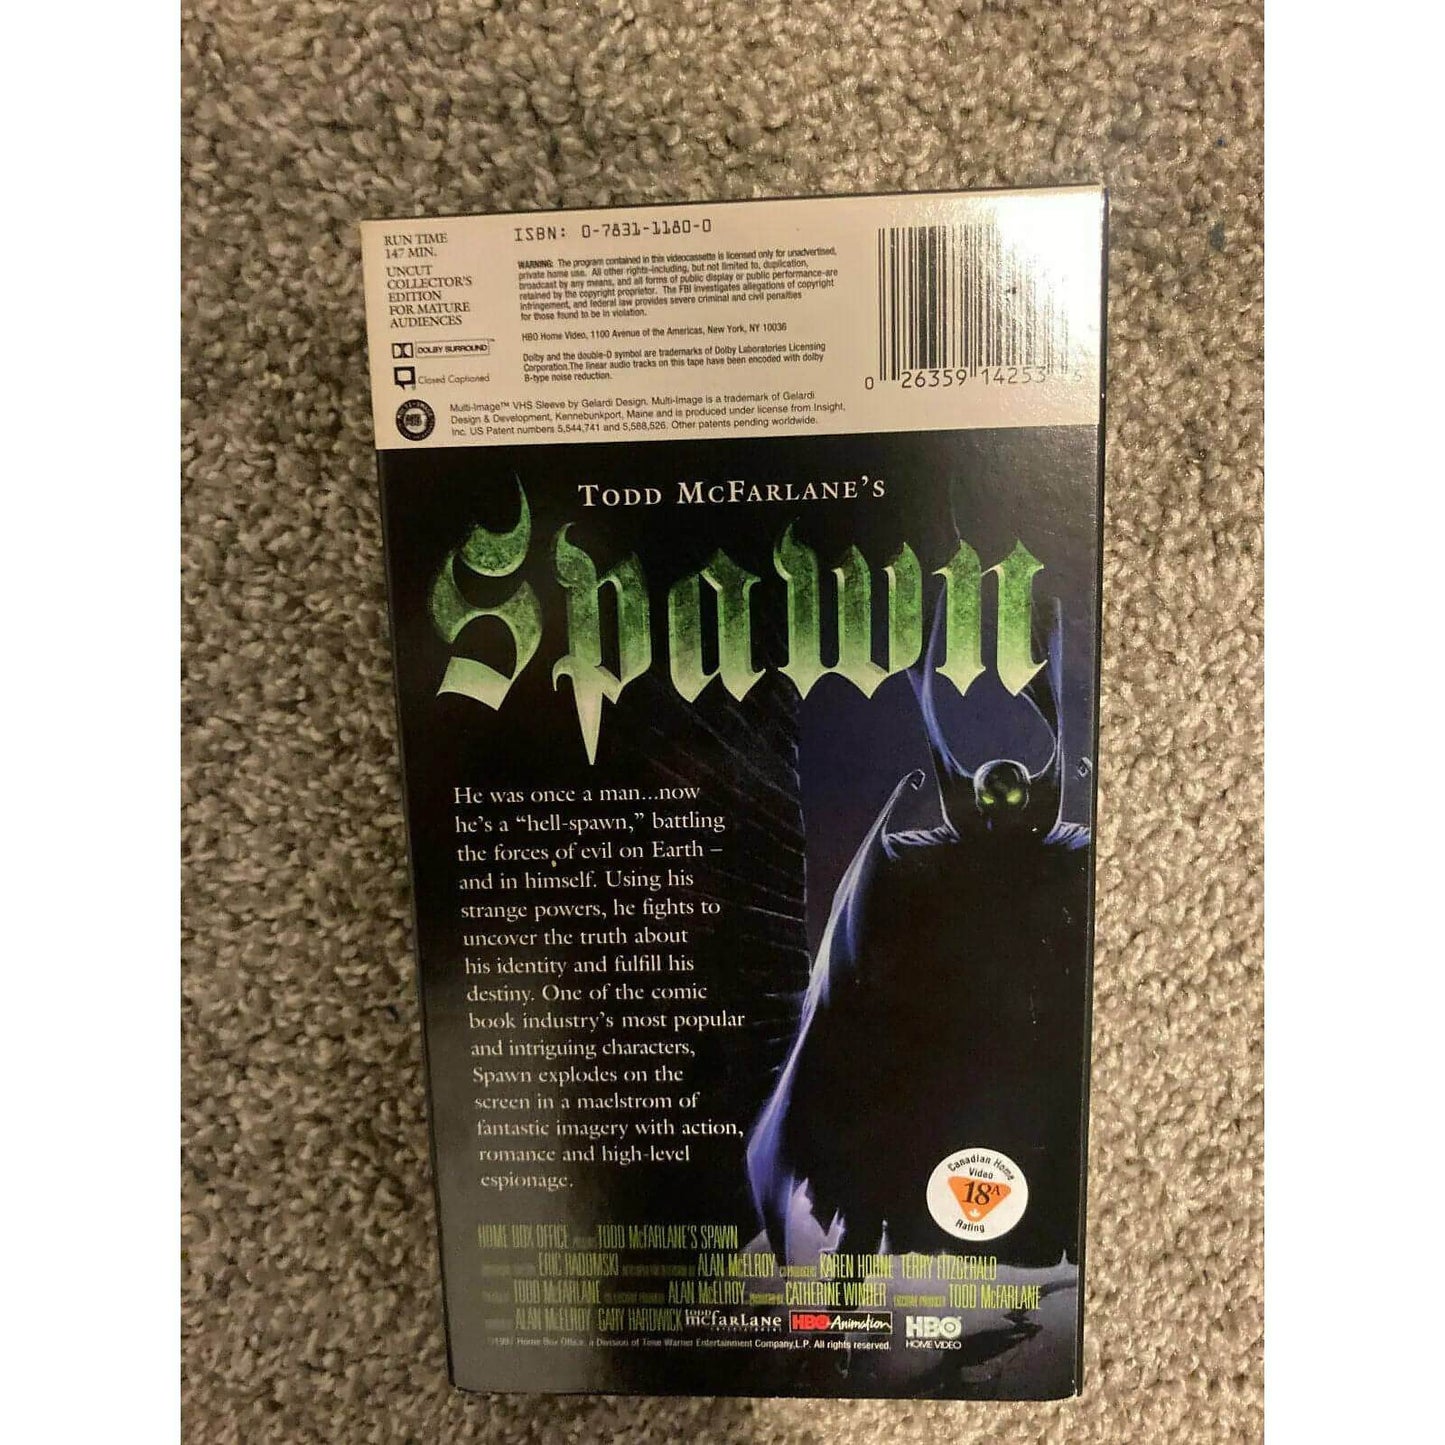 Todd McFarlanes Spawn (VHS, 1997, Unrated) BooksCardsNBikes